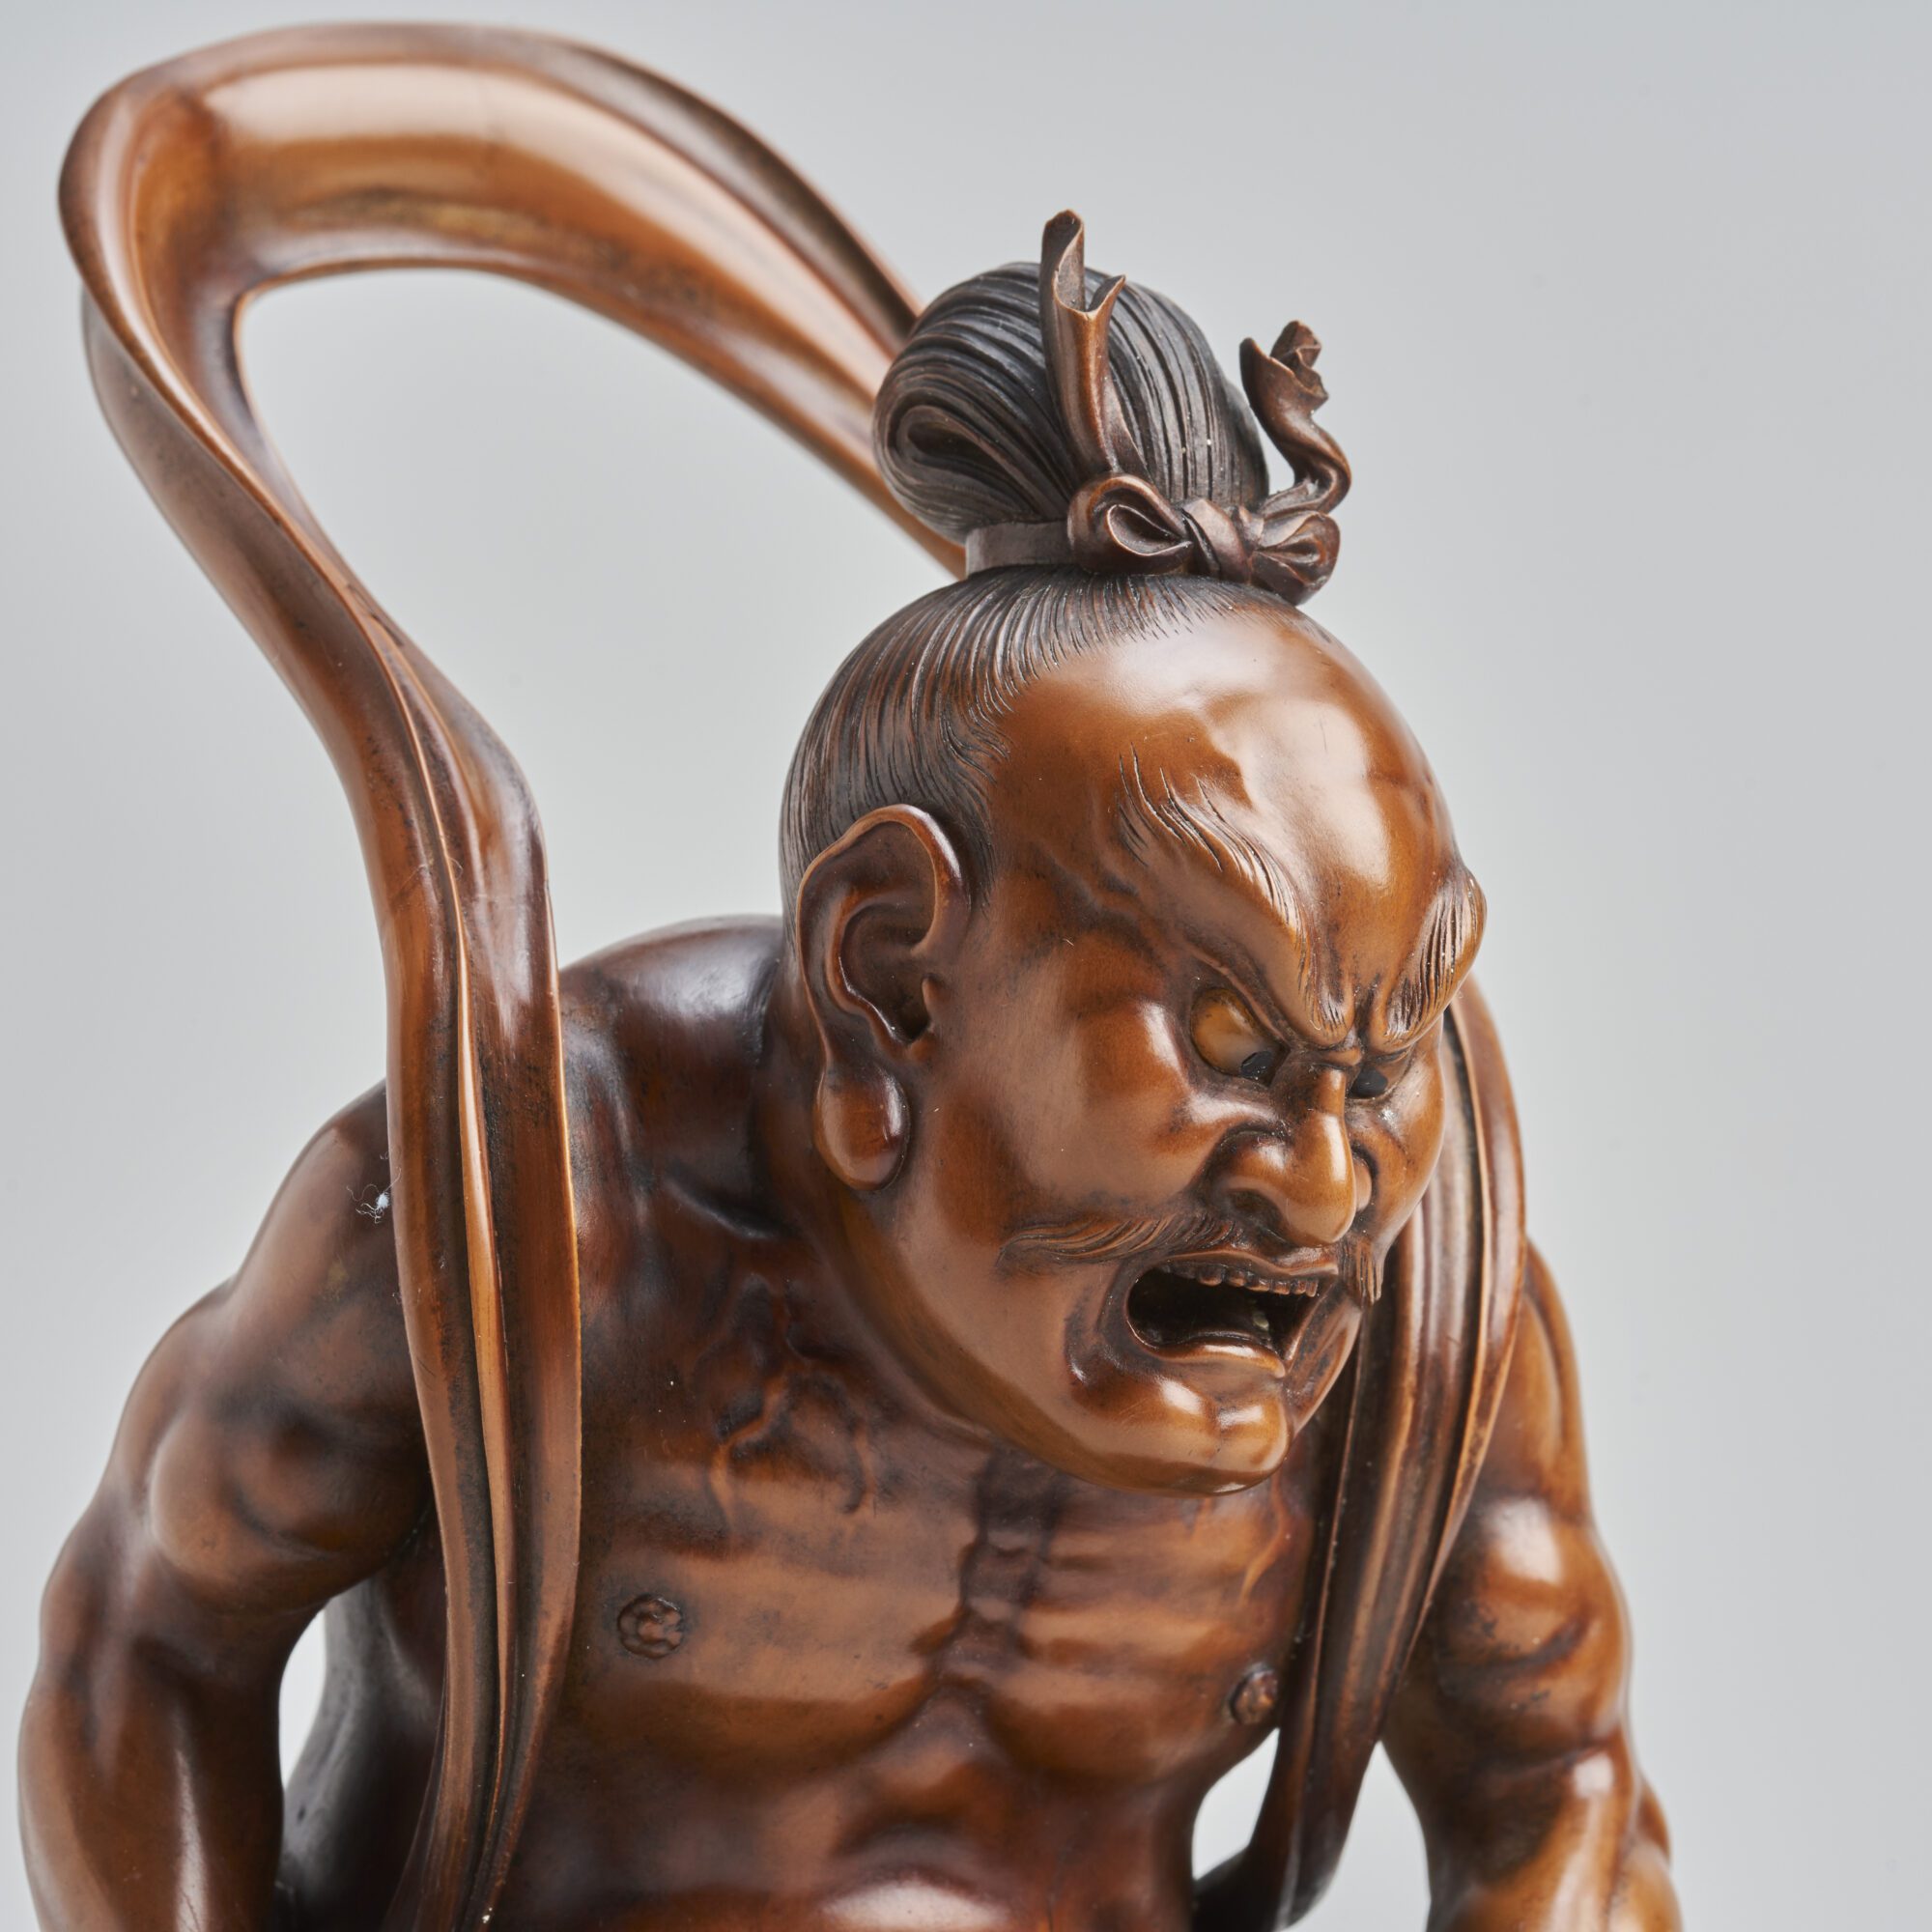 A fascinating, Japanese wood-carved Okimono pair of Temple Guardians (Nio) from Kevin Page